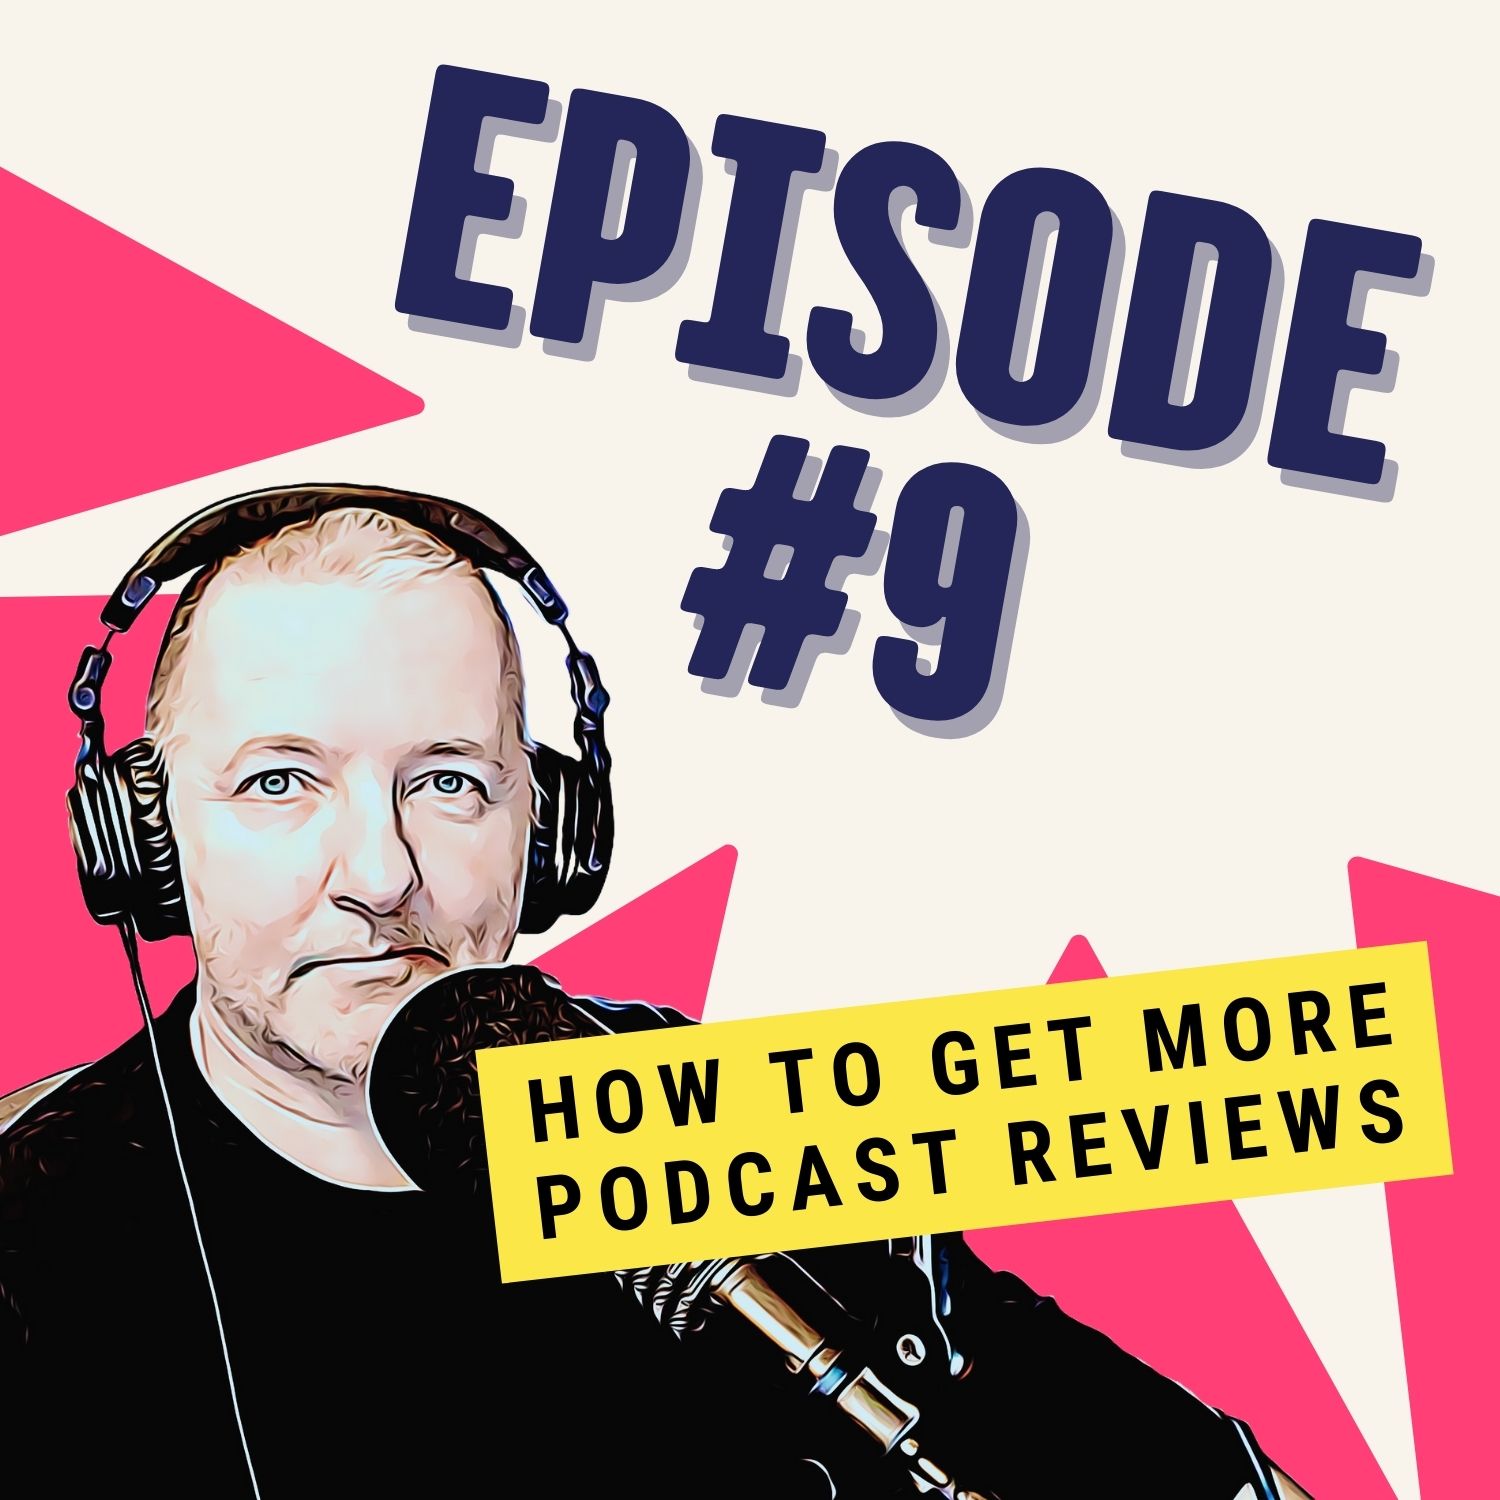 How to Get More Podcast Reviews